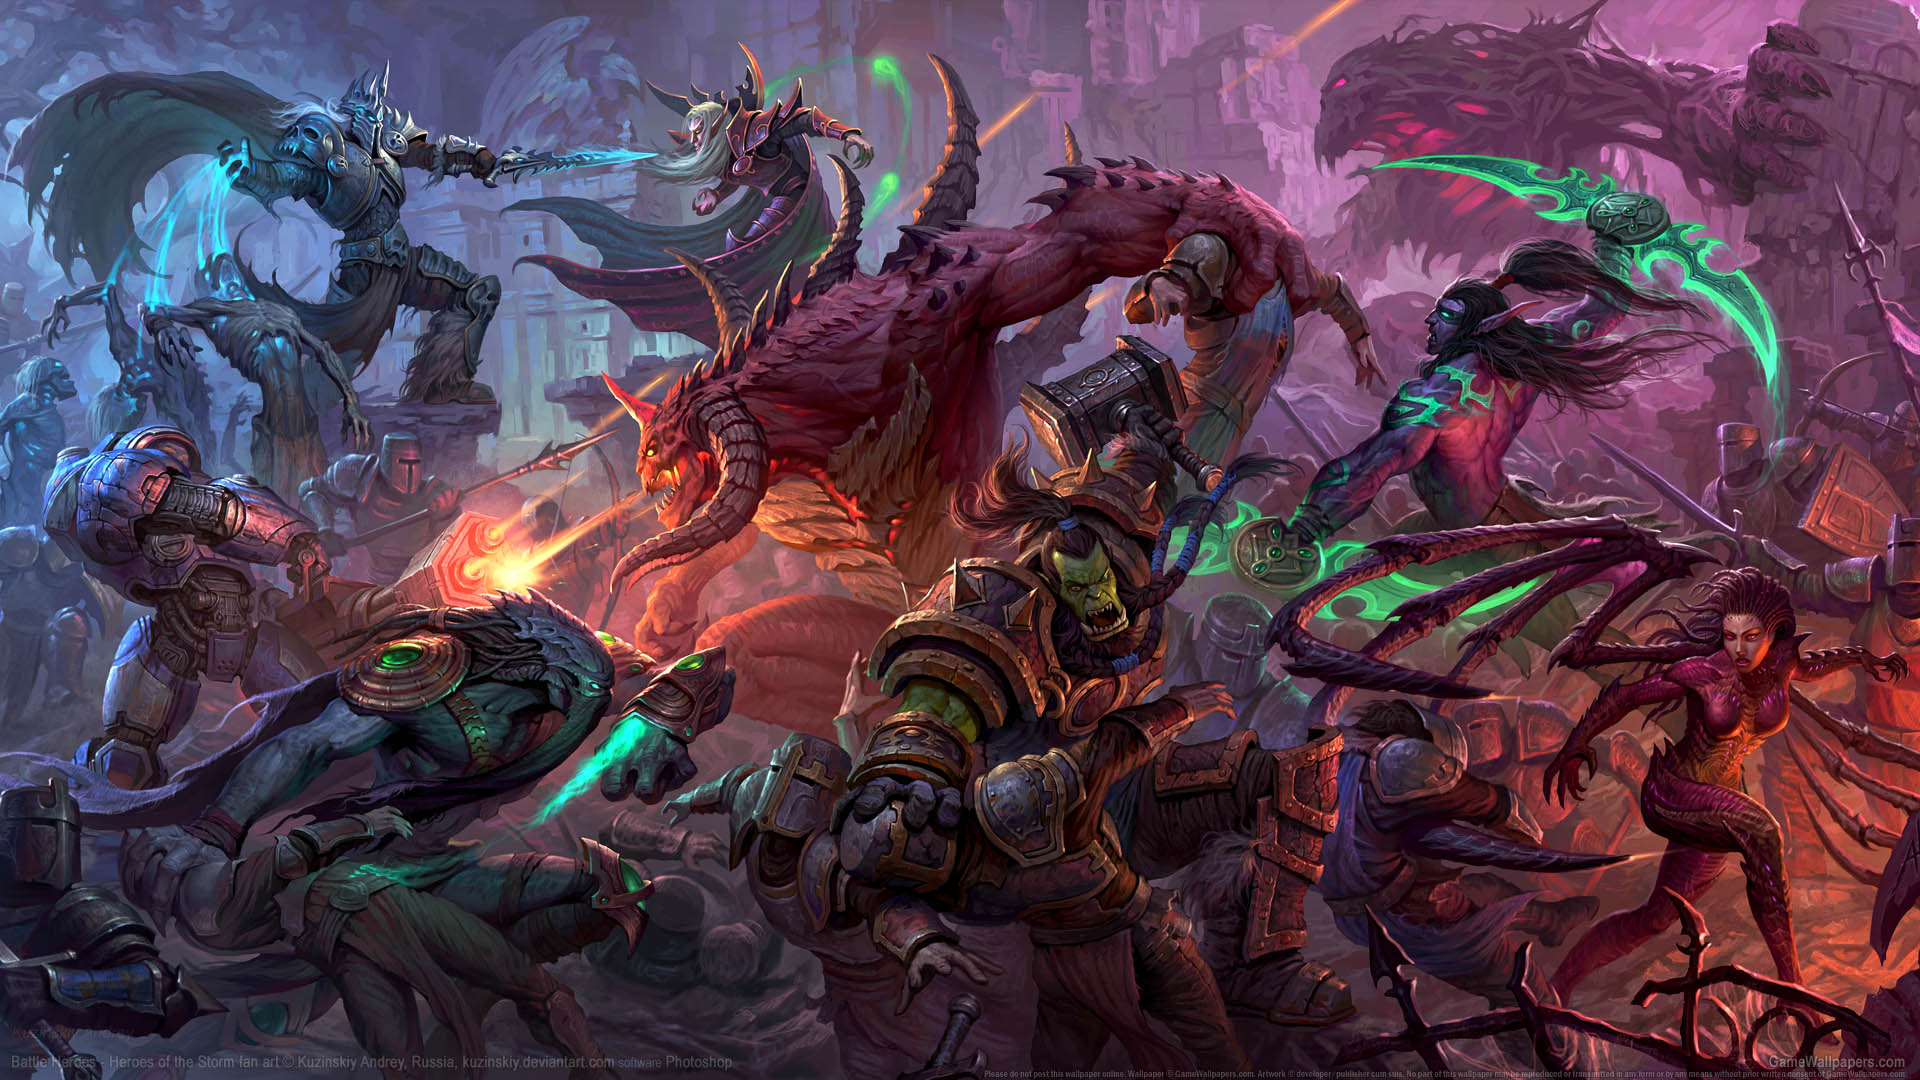 heroes of the storm wallpaper 1920x1080,action adventure game,fictional character,demon,cg artwork,pc game